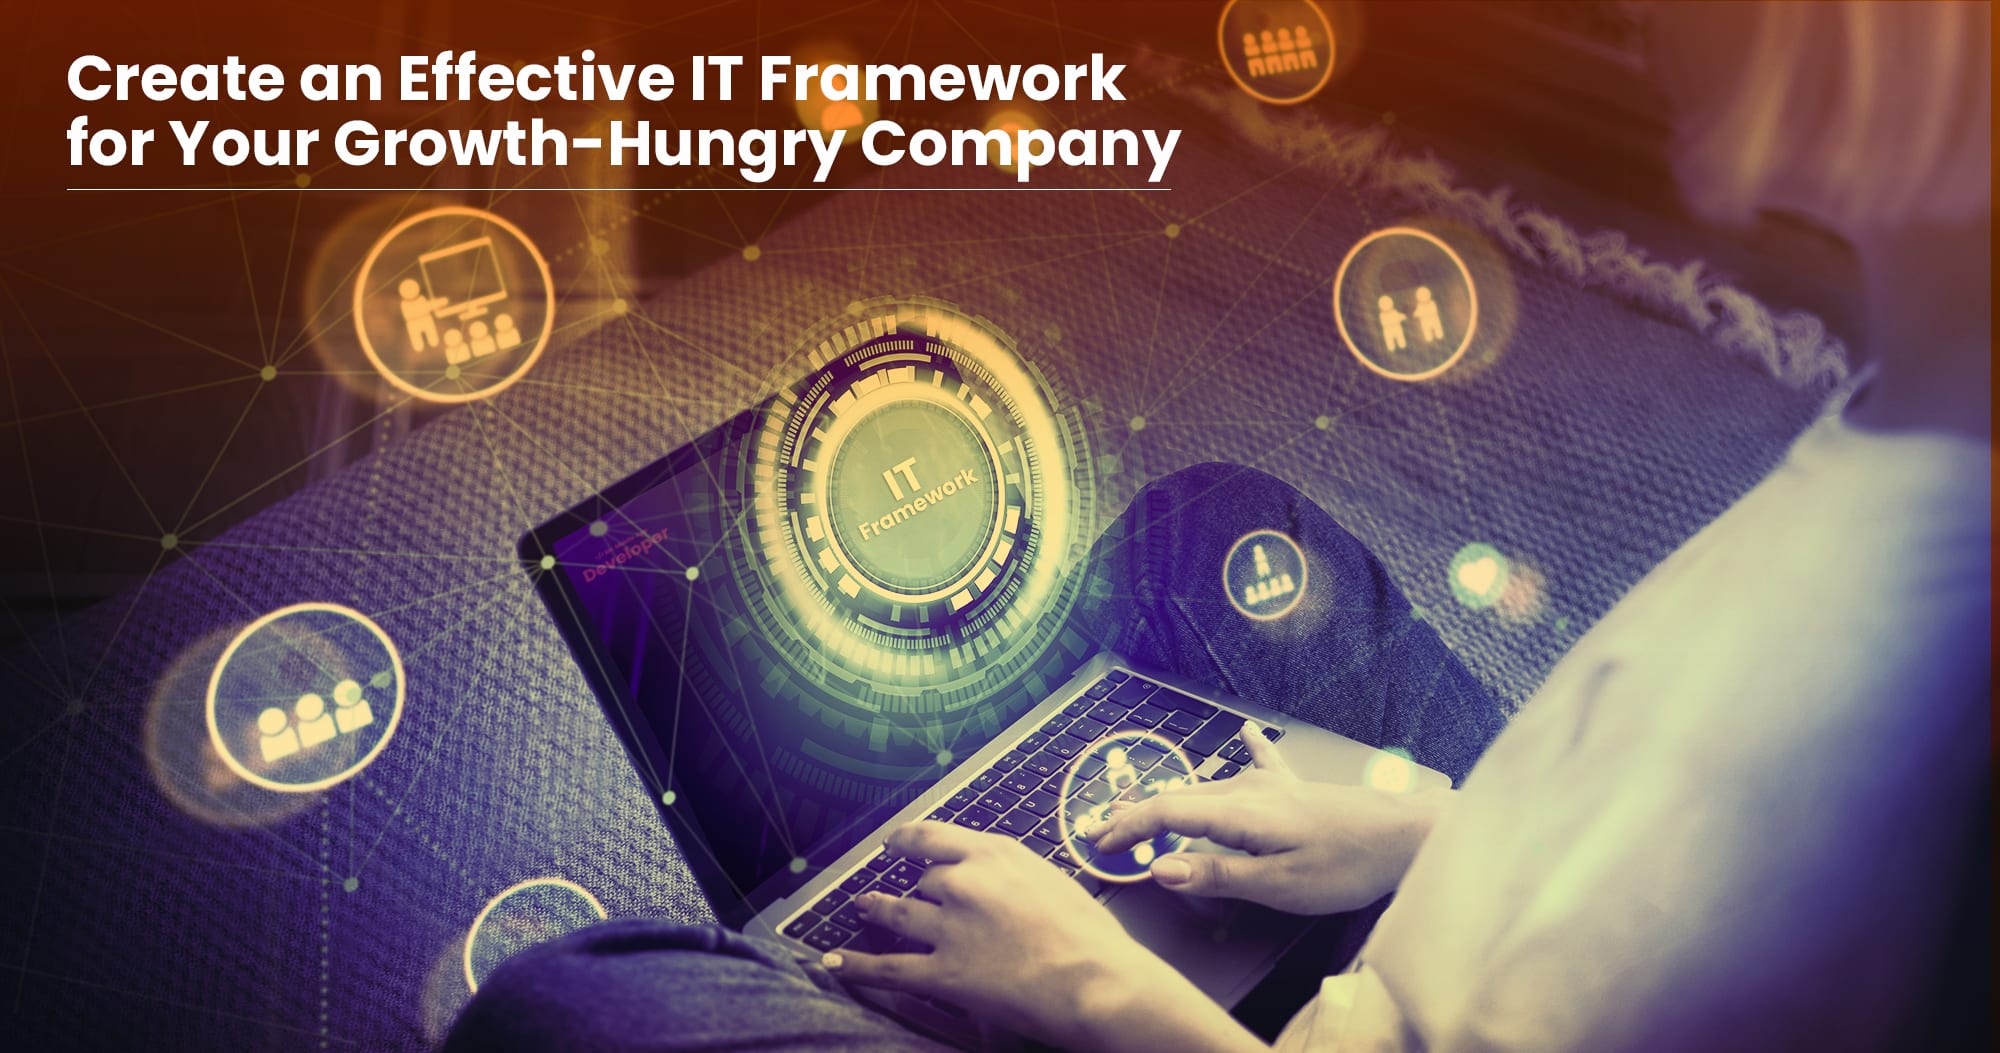 Create an Effective IT Framework for Your Growth-Hungry Company